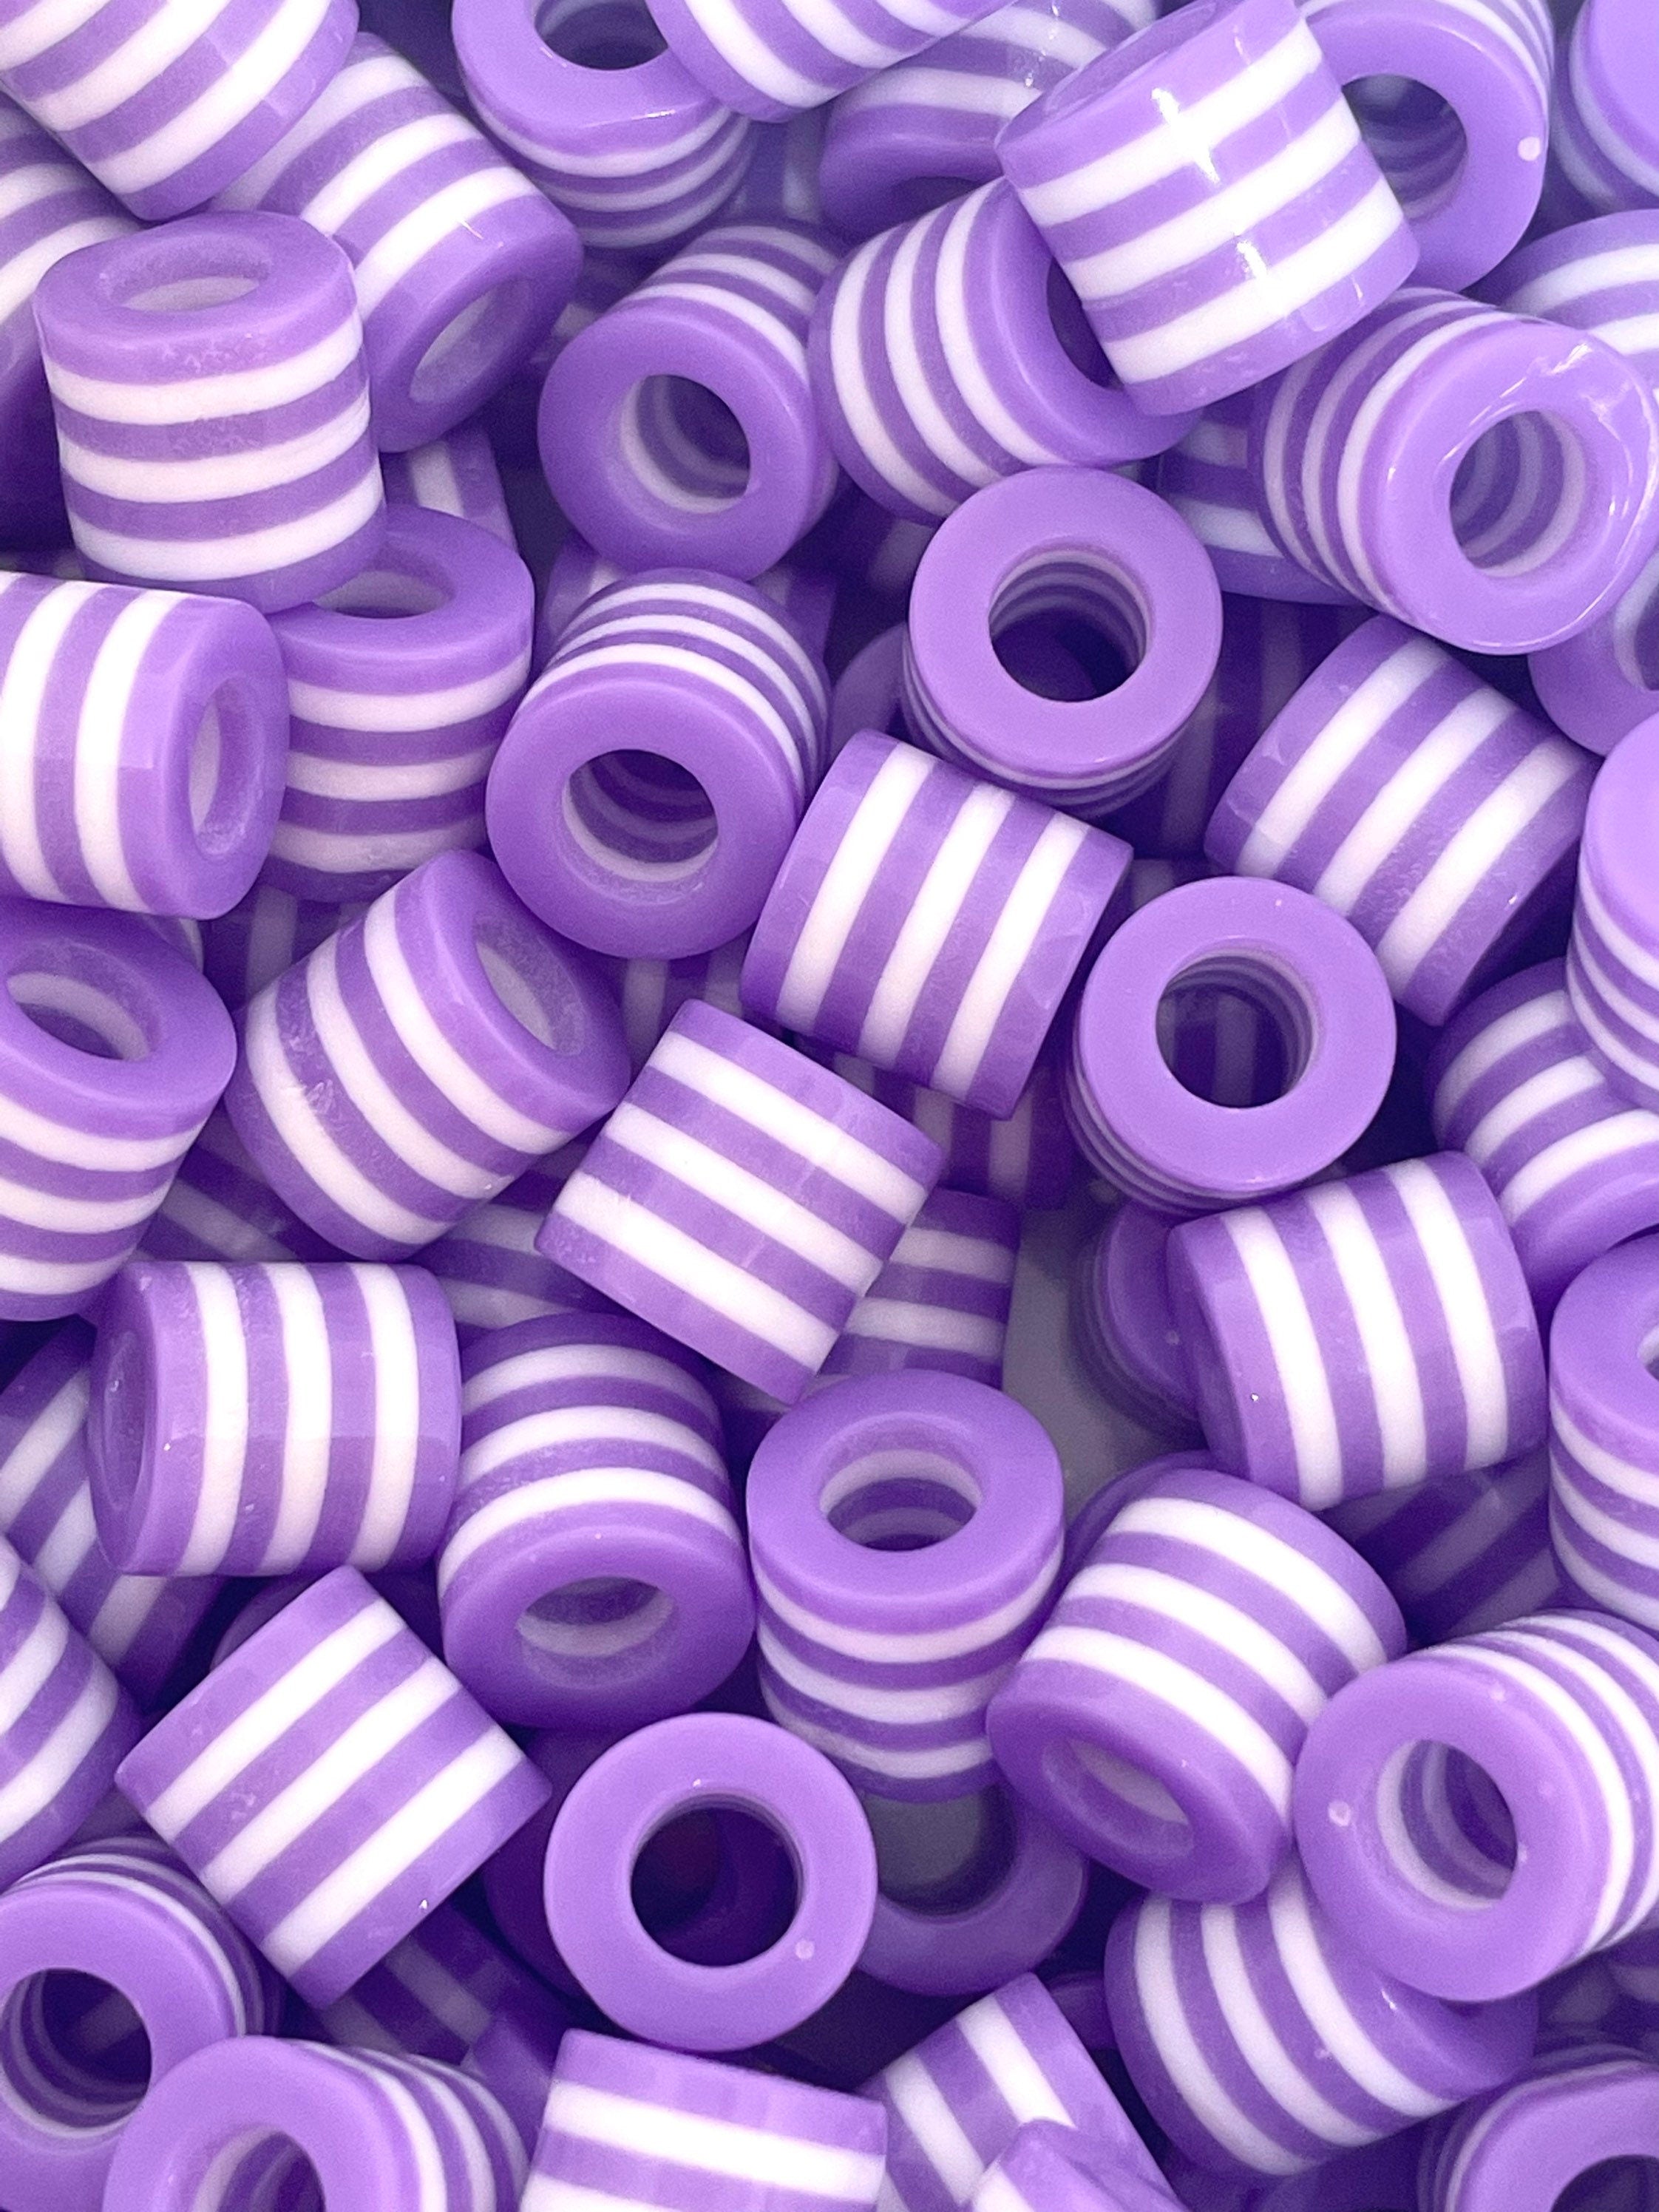 Purple Striped Drum Beads for Jewelry Making, Bracelet, Necklace, Hair, Striped Beads, Purple Beads, Lavender Themed